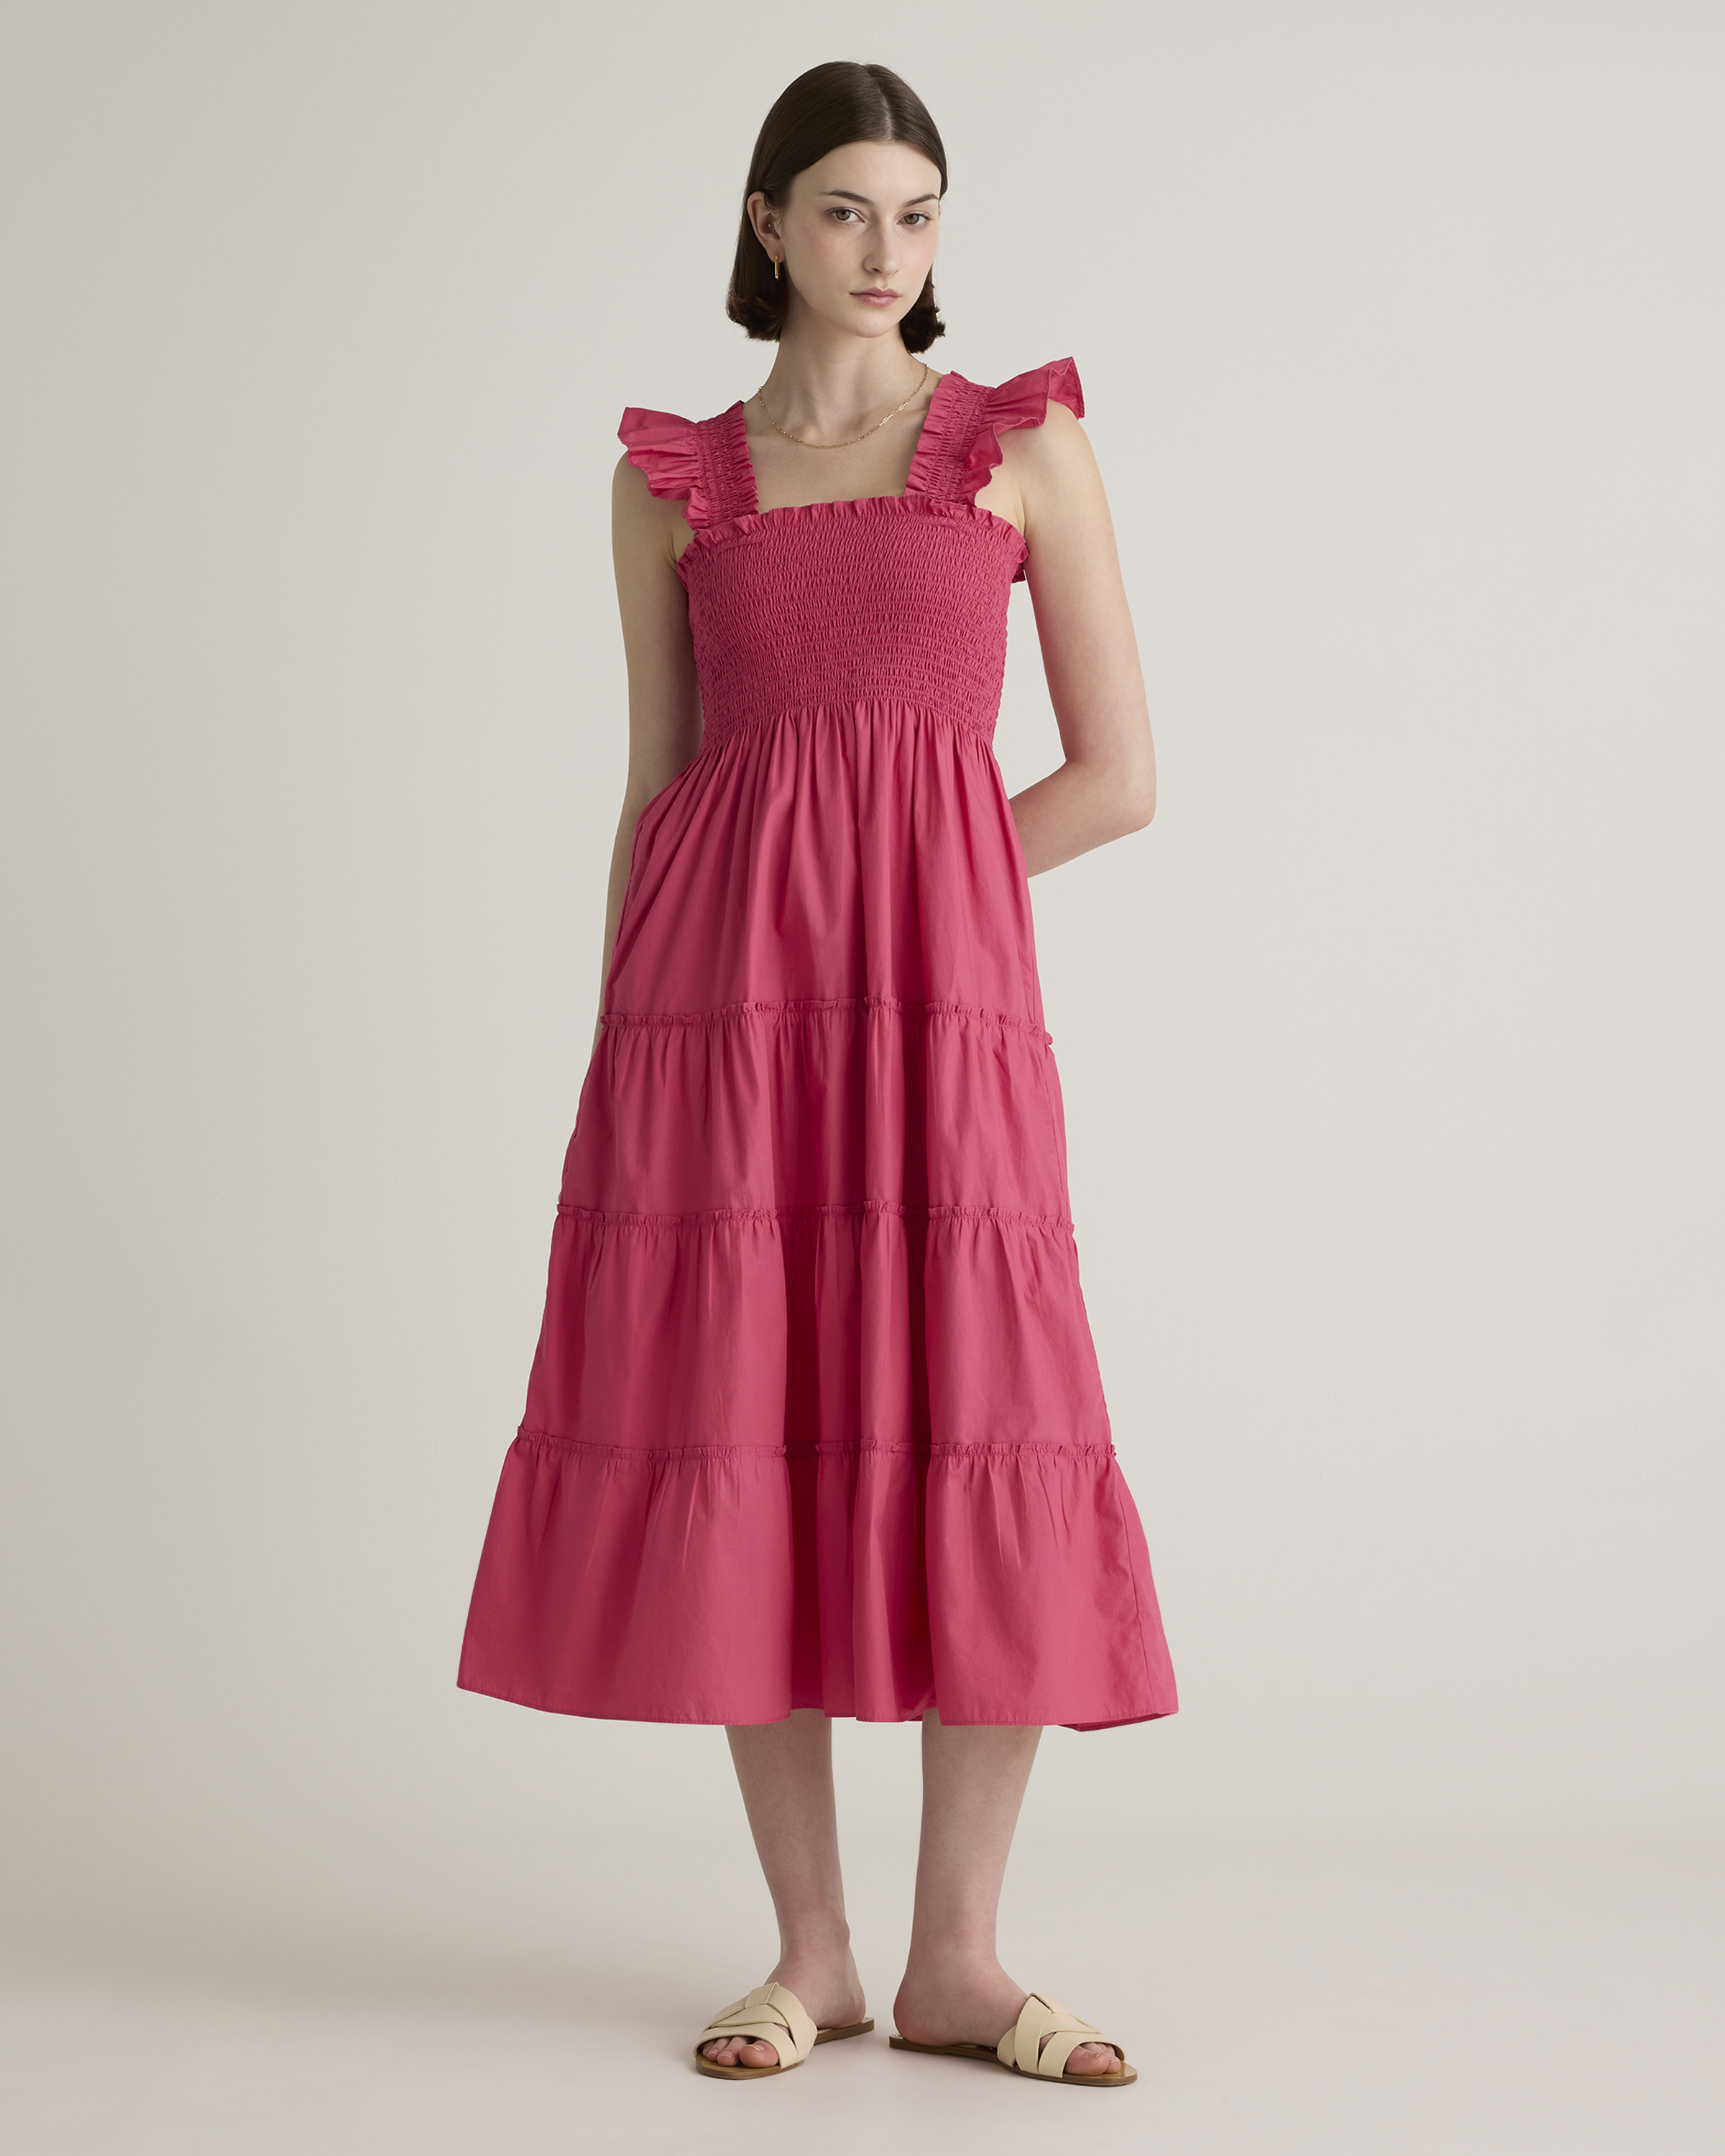 Quince Women's Smocked Midi Dress In Pink